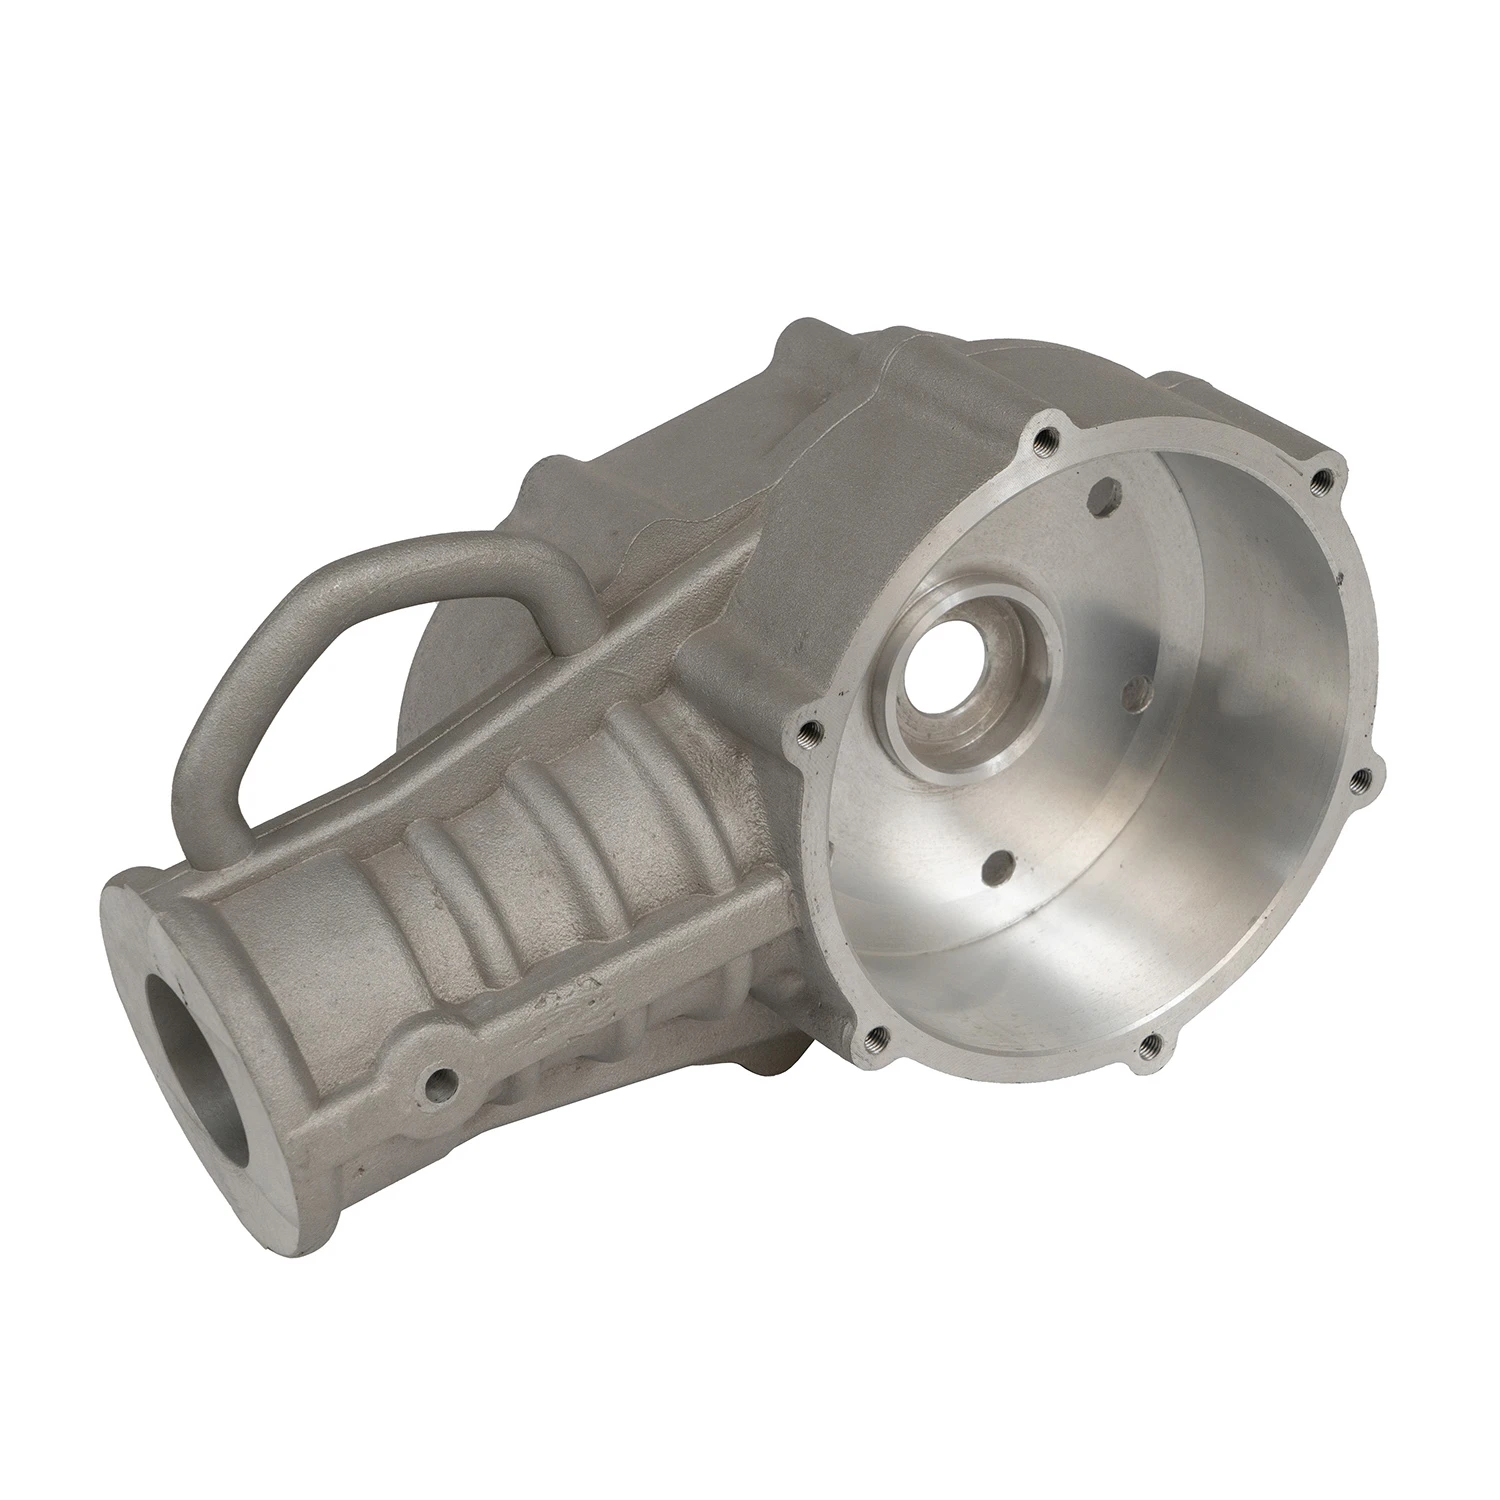 Aluminum alloy die-casting customized drawings, aluminum alloy die-casting parts, cast aluminum product manufacturers